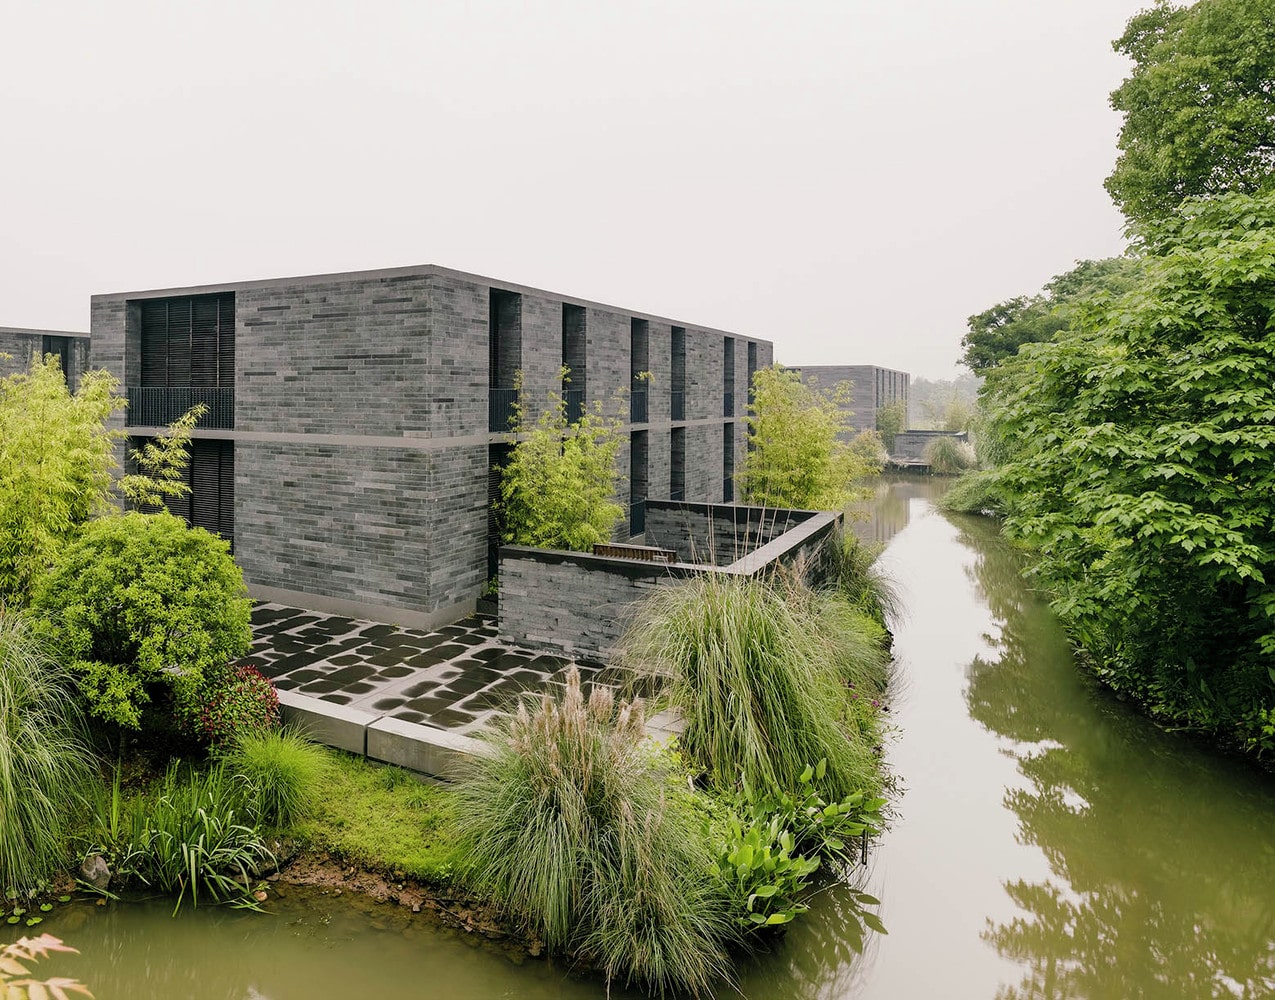 Source: https://www.archdaily.com/777243/xixi-wetland-estate-david-chipperfield-architects-plus?ad_source=search&ad_medium=search_result_all